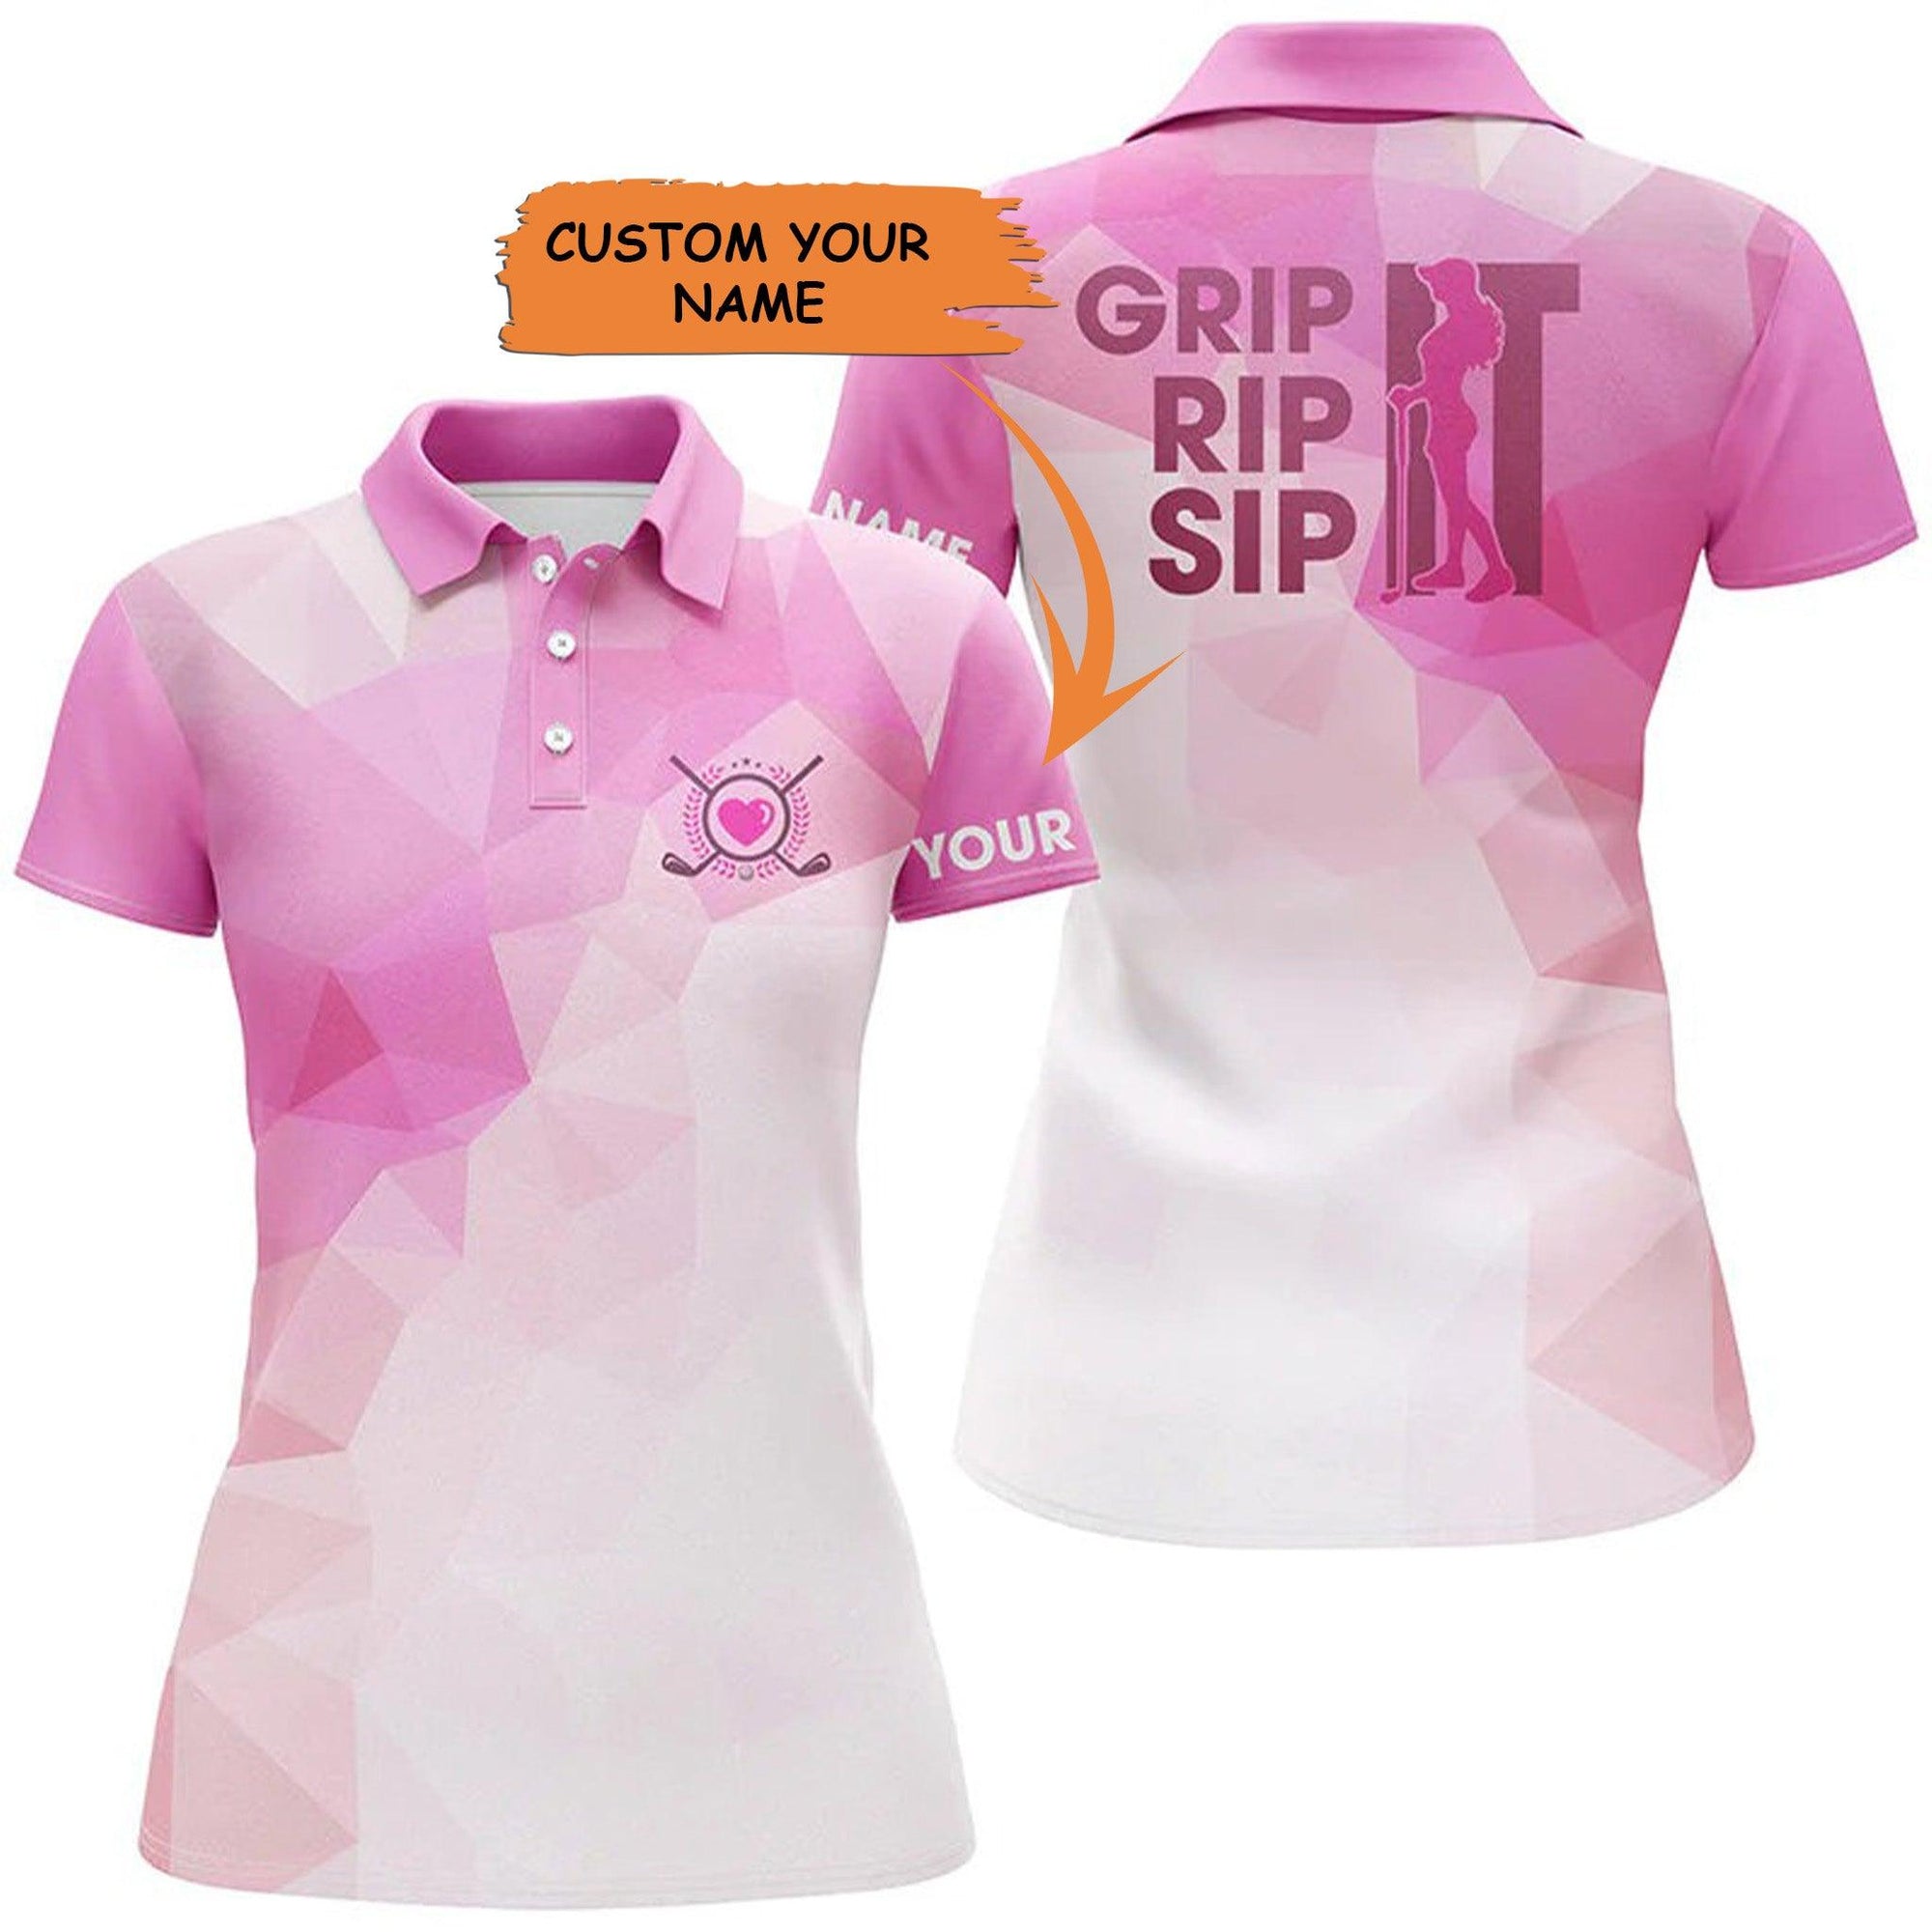 Customized Name Golf Women Polo Shirts - Personalized Grip It Rip It Sip It, Golf Tops For Ladies - Perfect Gift For Golfers, Golf Lovers - Amzanimalsgift